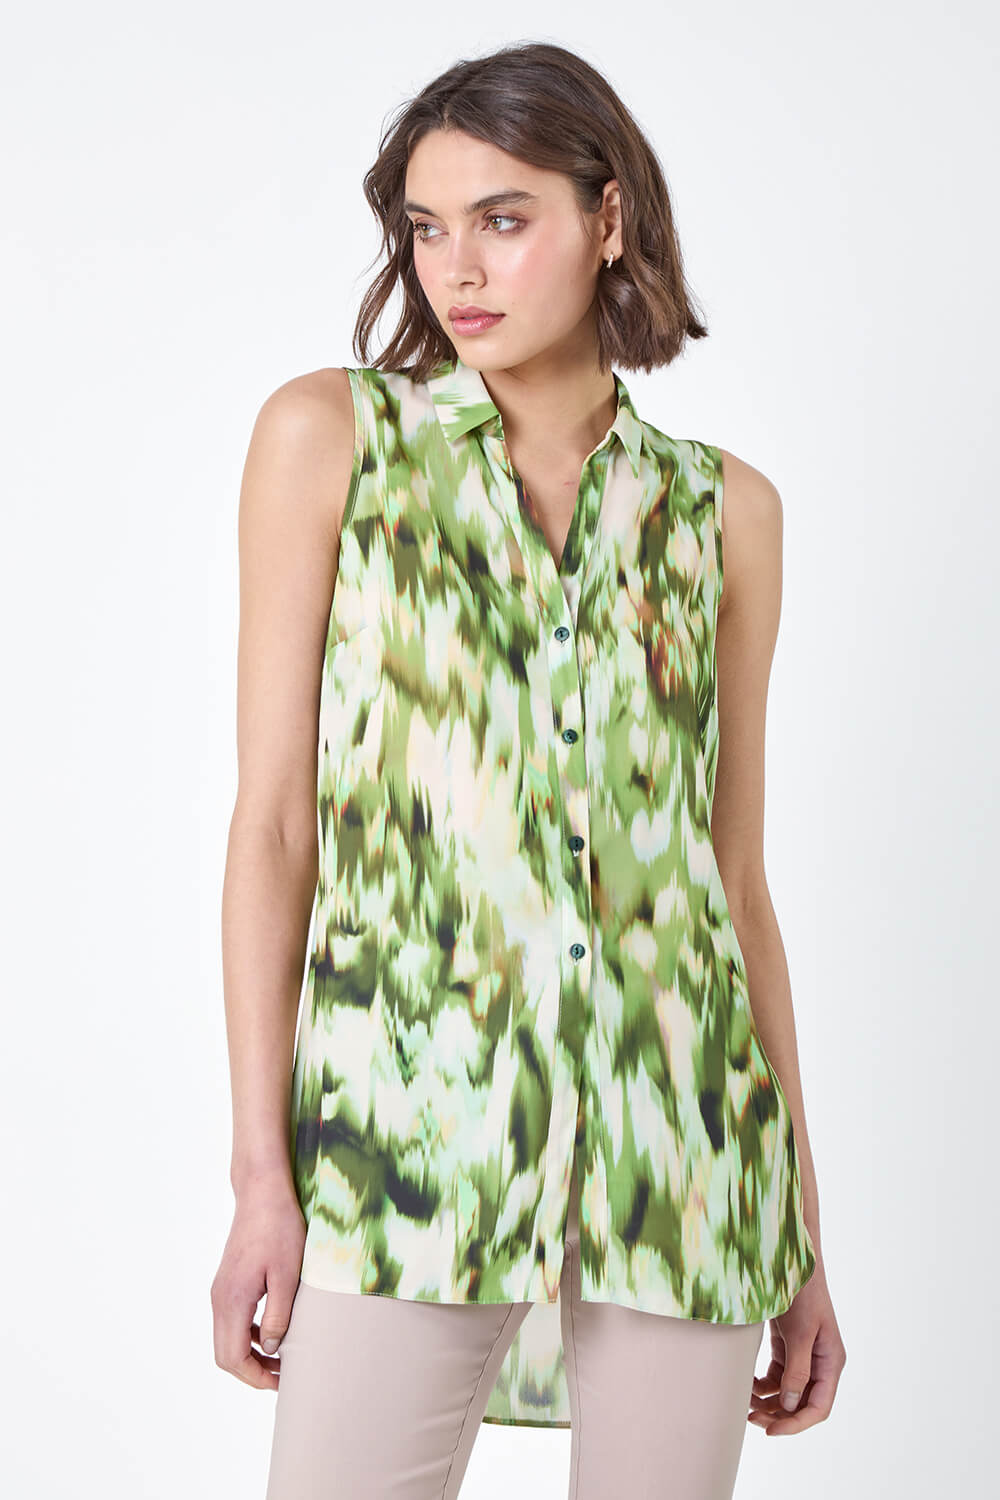 Green Abstract Print Sleeveless Button Blouse, Image 4 of 5